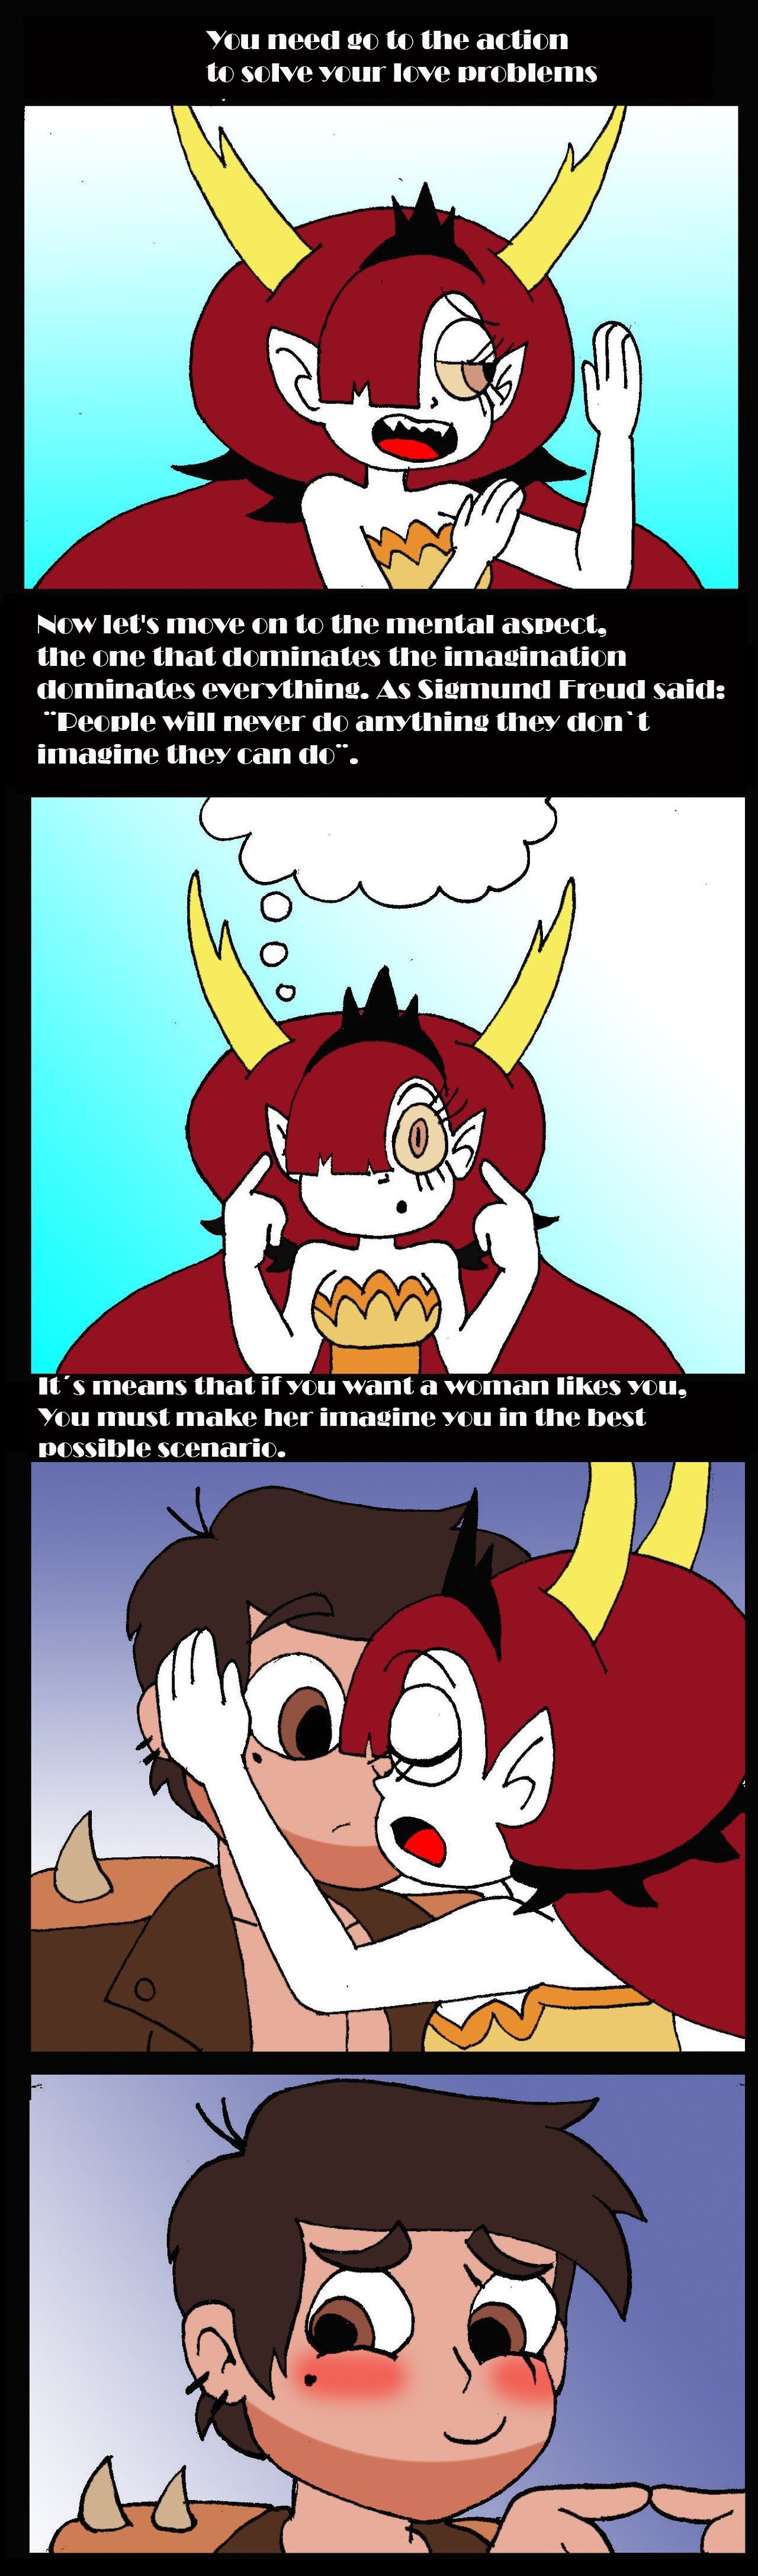 Playing with Fire (Star vs. the Forces of Evil) by Ferozyraptor page 14